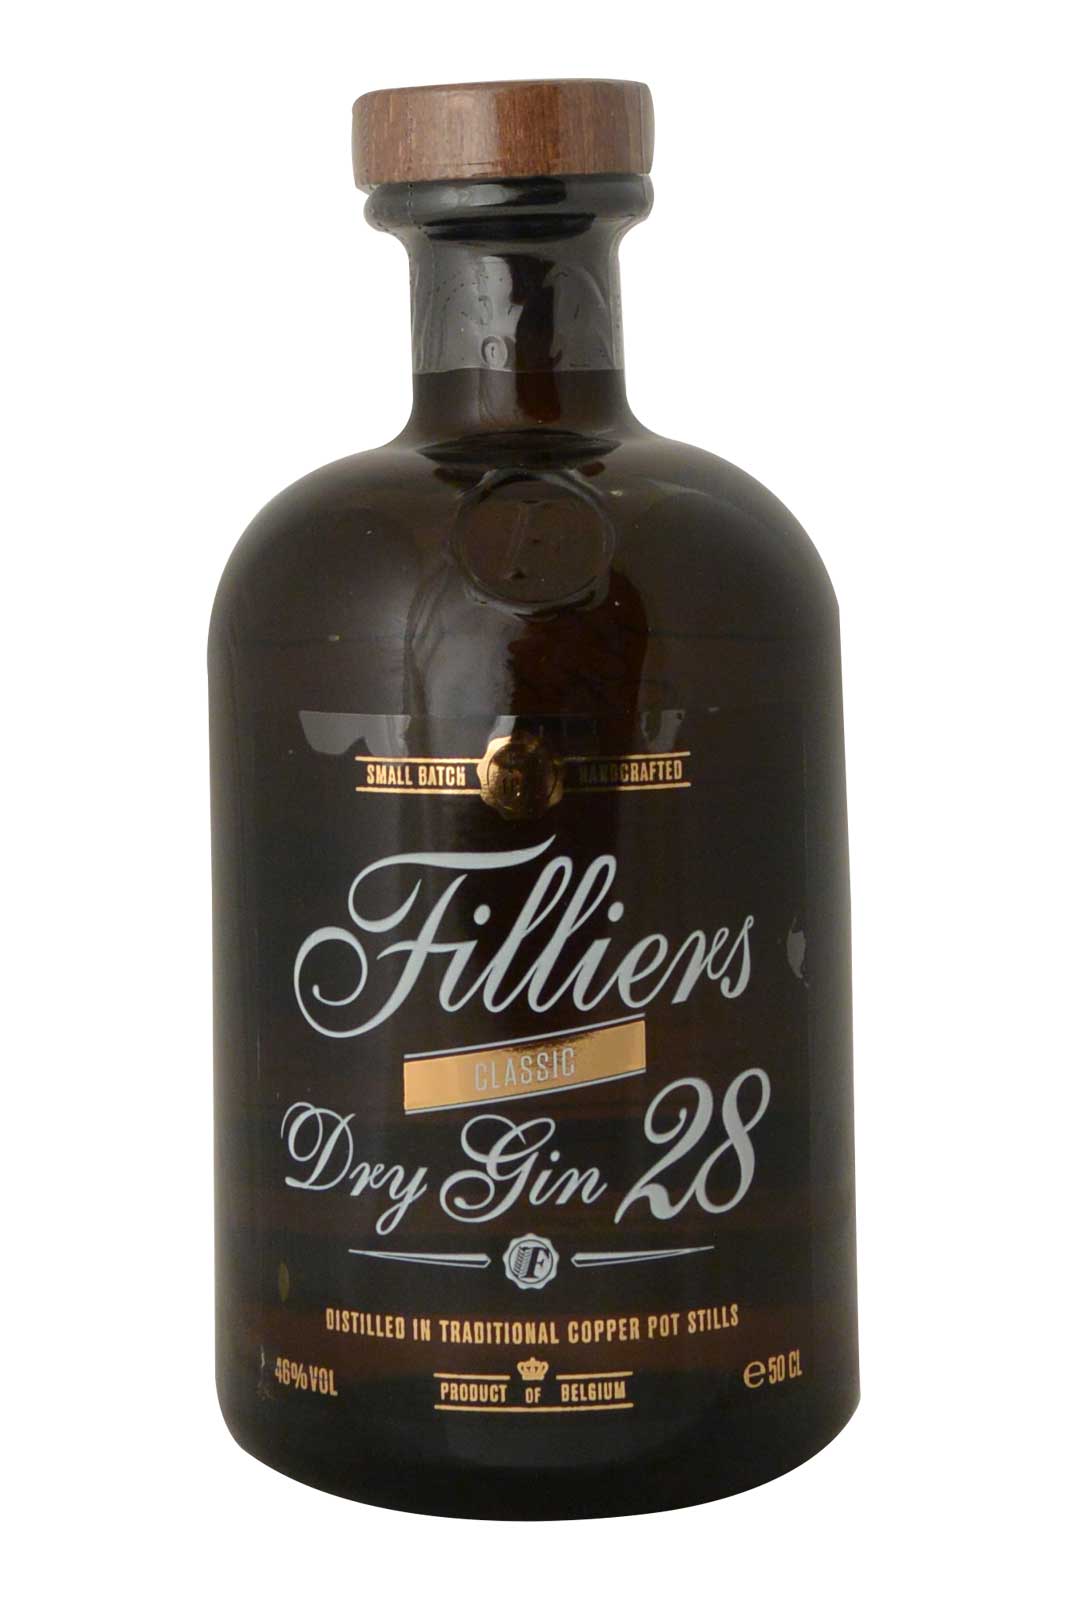 Filliers Dry Gin 28 Classic with Glass - Gift Box